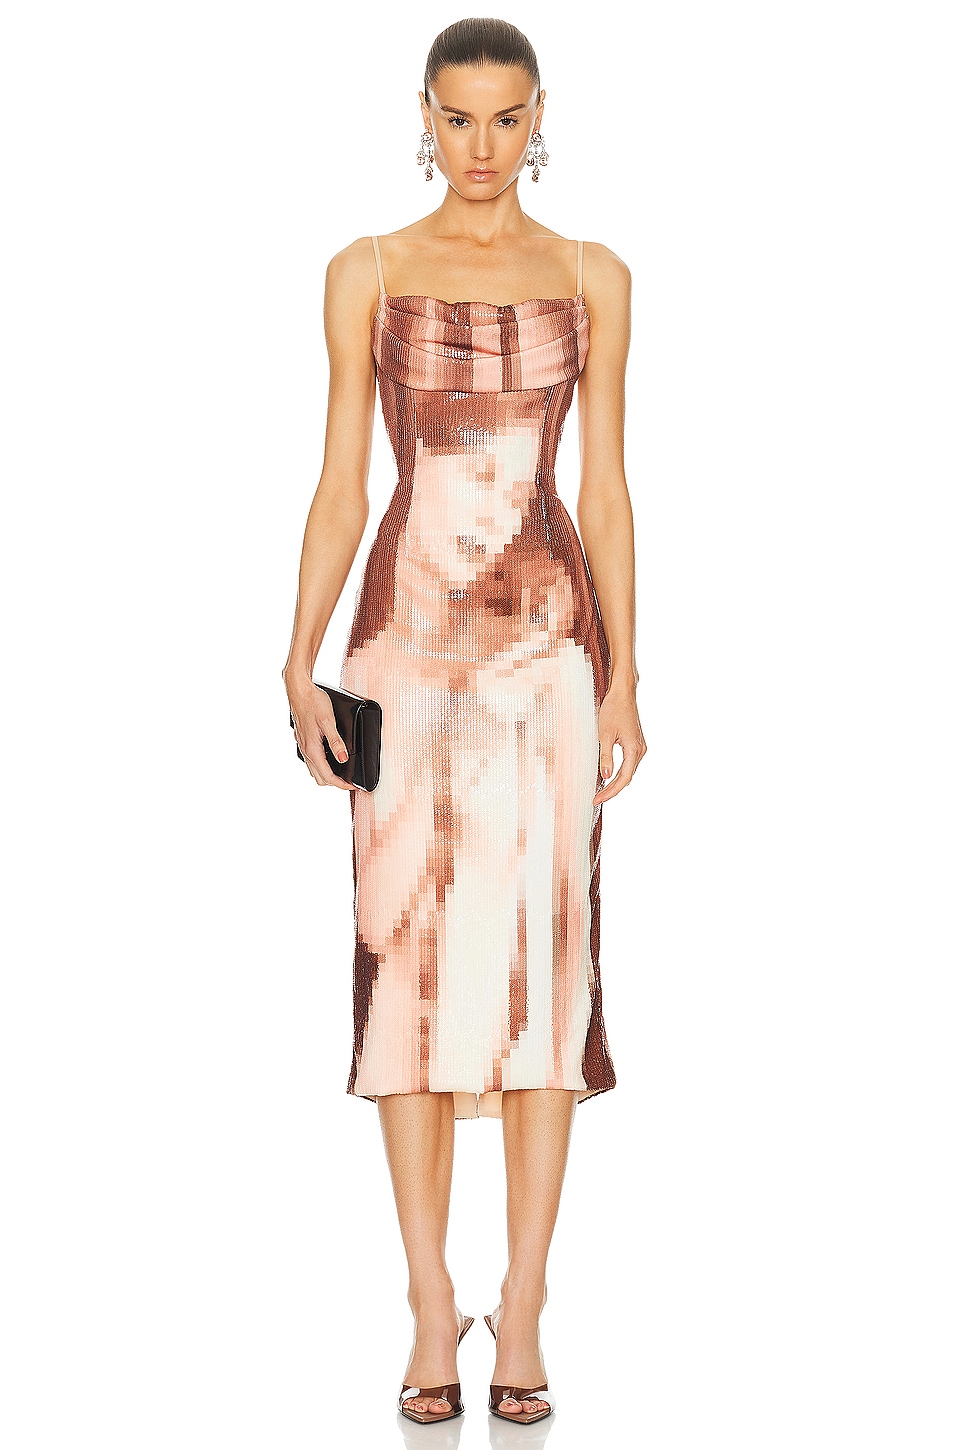 Image 1 of Wiederhoeft Lady Of The Drapes Spaghetti Strap Dress in Blush